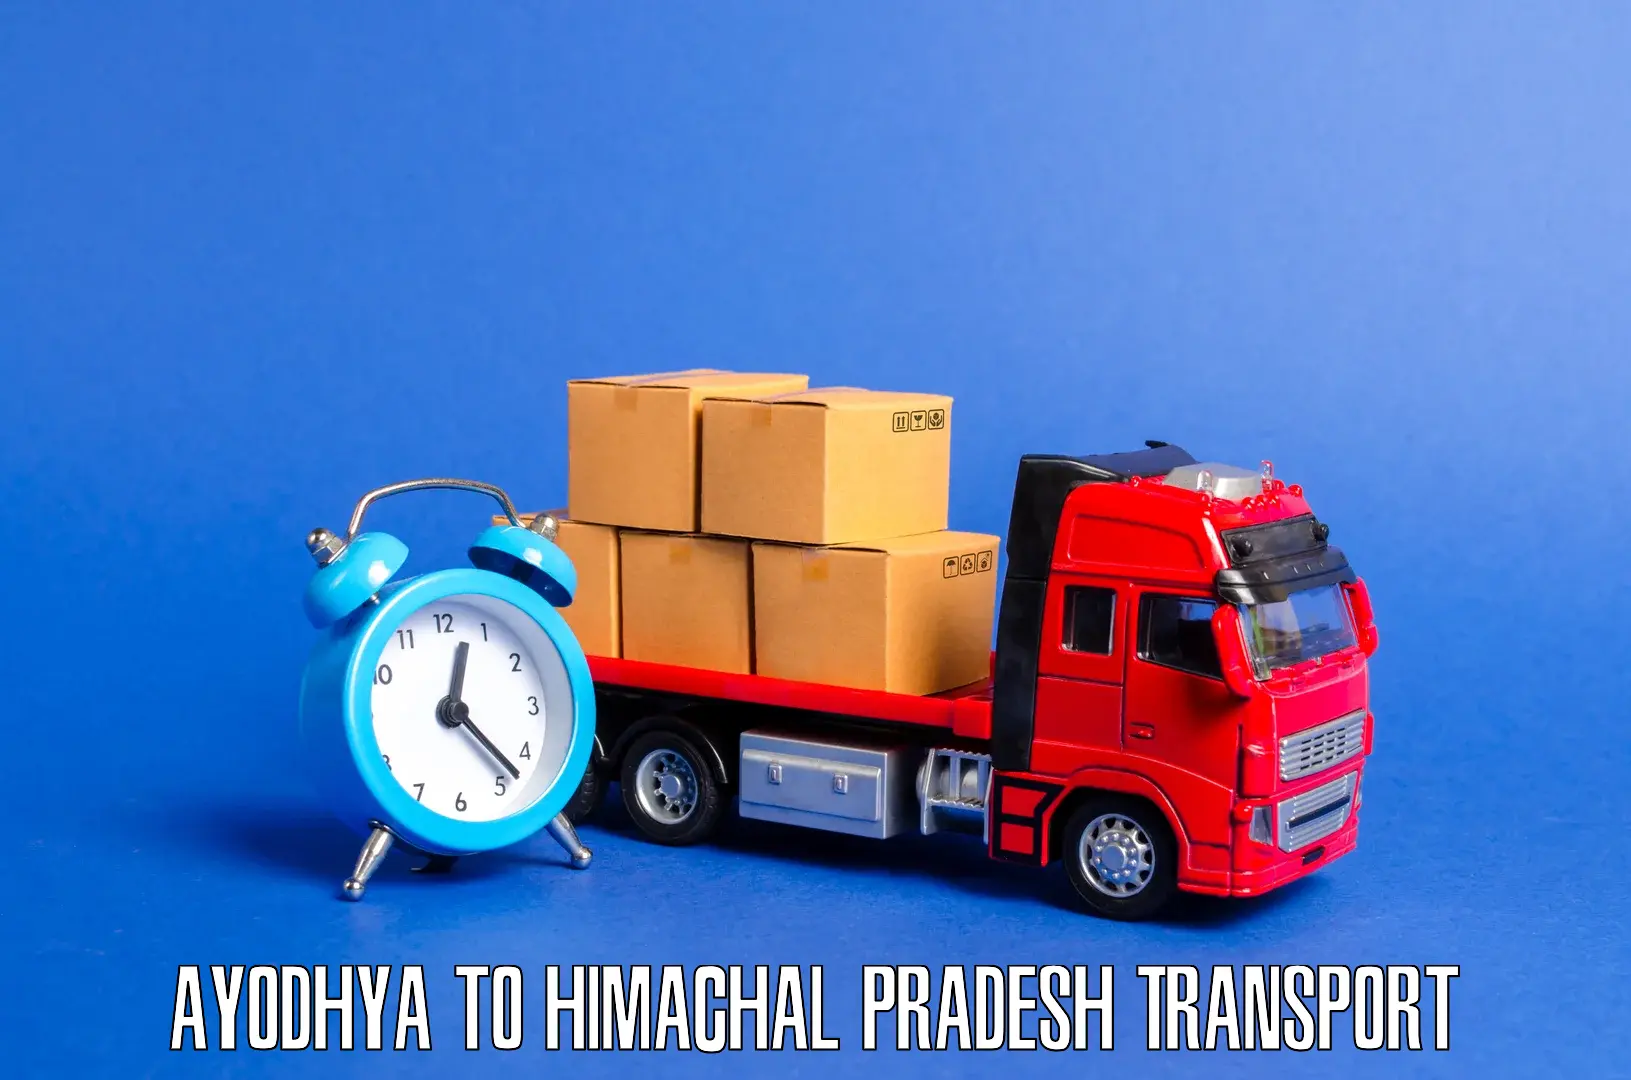 Delivery service Ayodhya to Manali